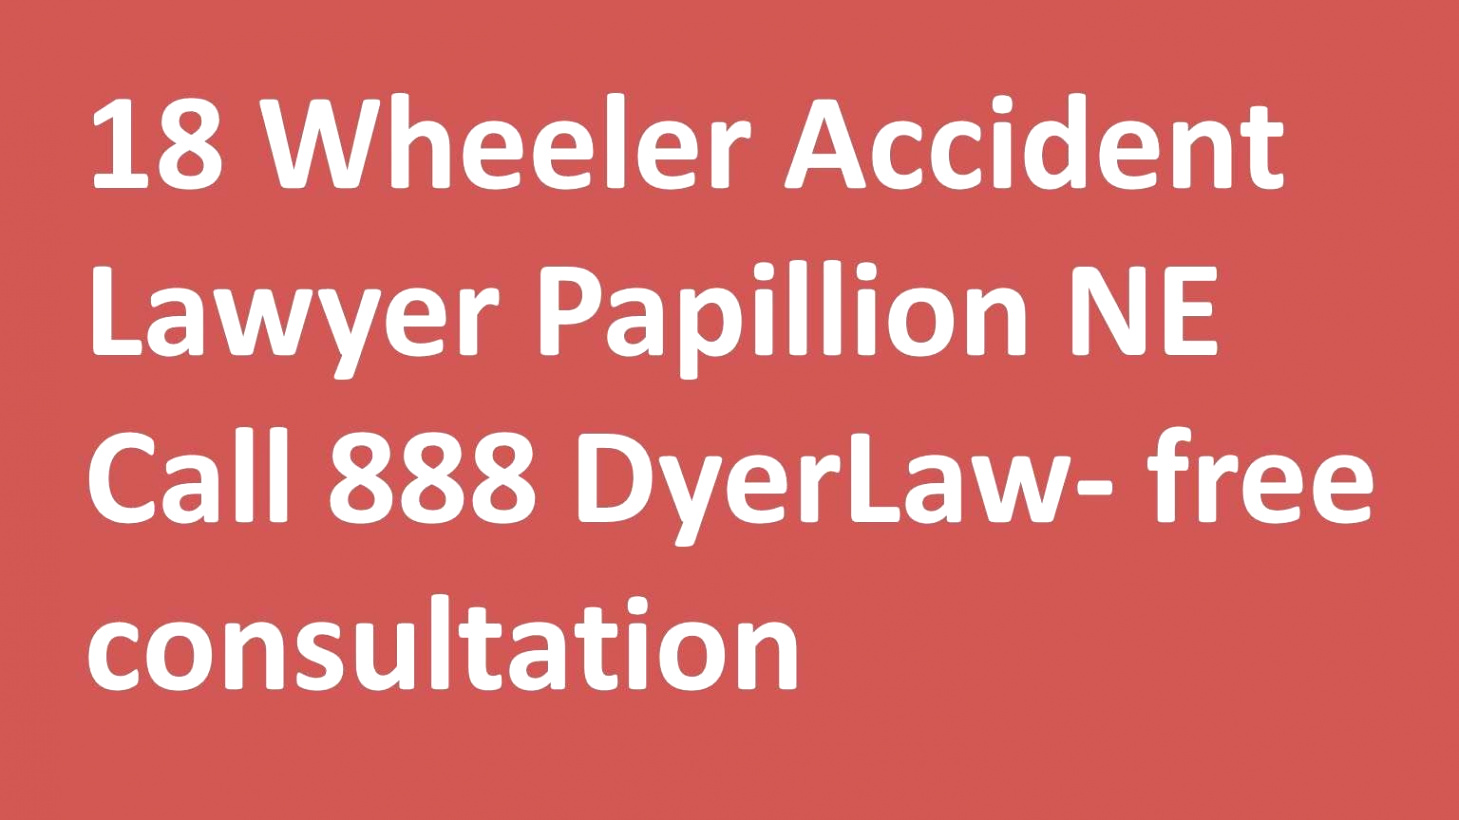 Car Accident Lawyer In Lincoln Ms Dans Pin On Videos